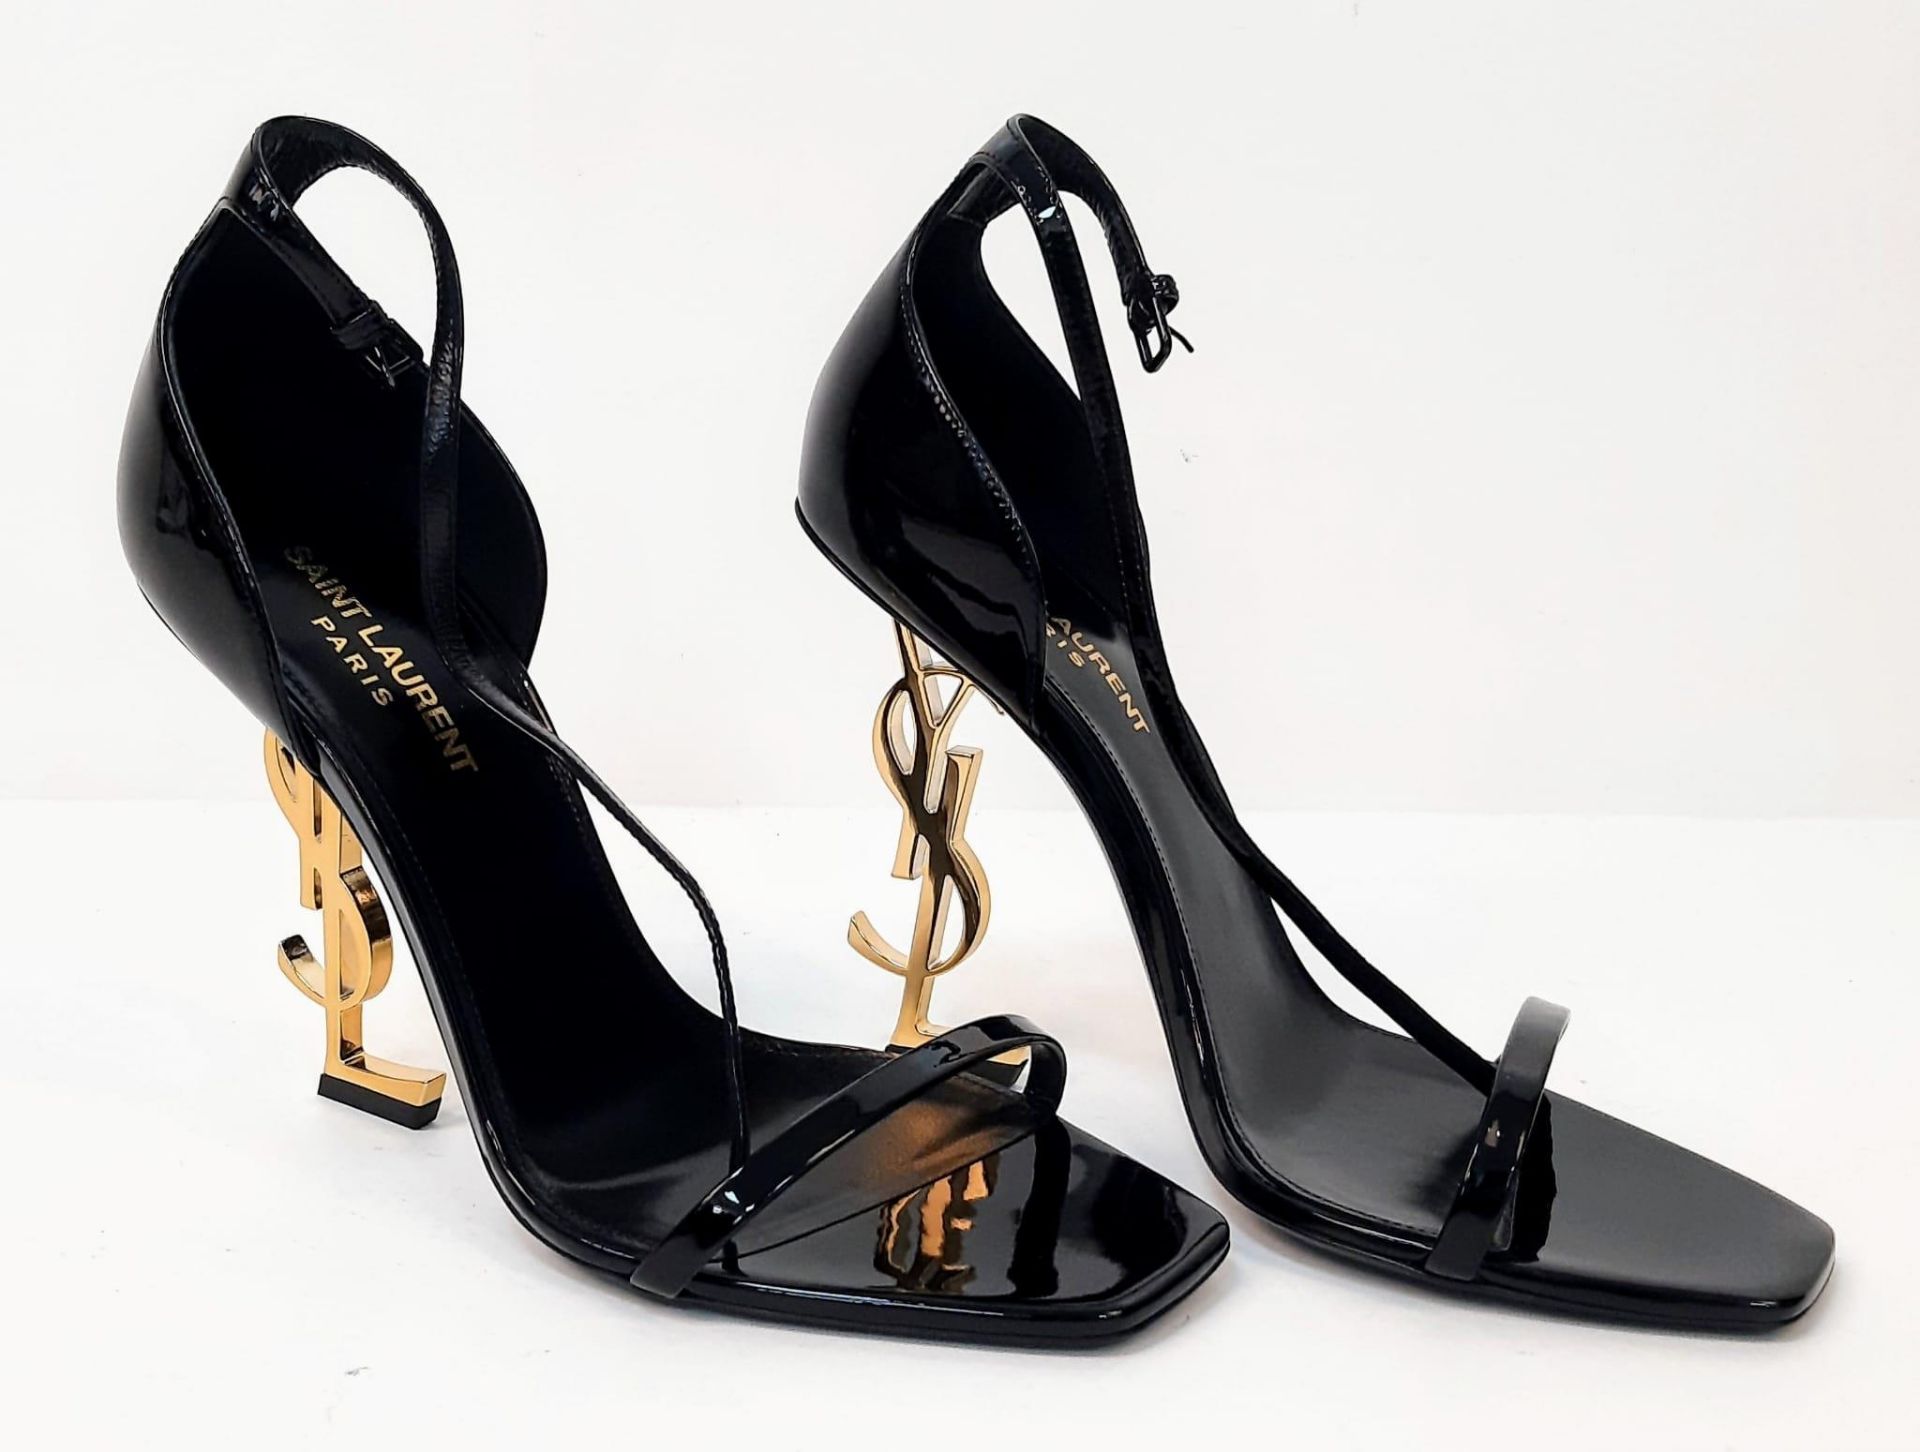 A PAIR OF NEW AND UNWORN YVES SAINT LAUREN "OPYUM" YSL HEEL COCKTAIL SHOES IN SIZE 6 UK . 39